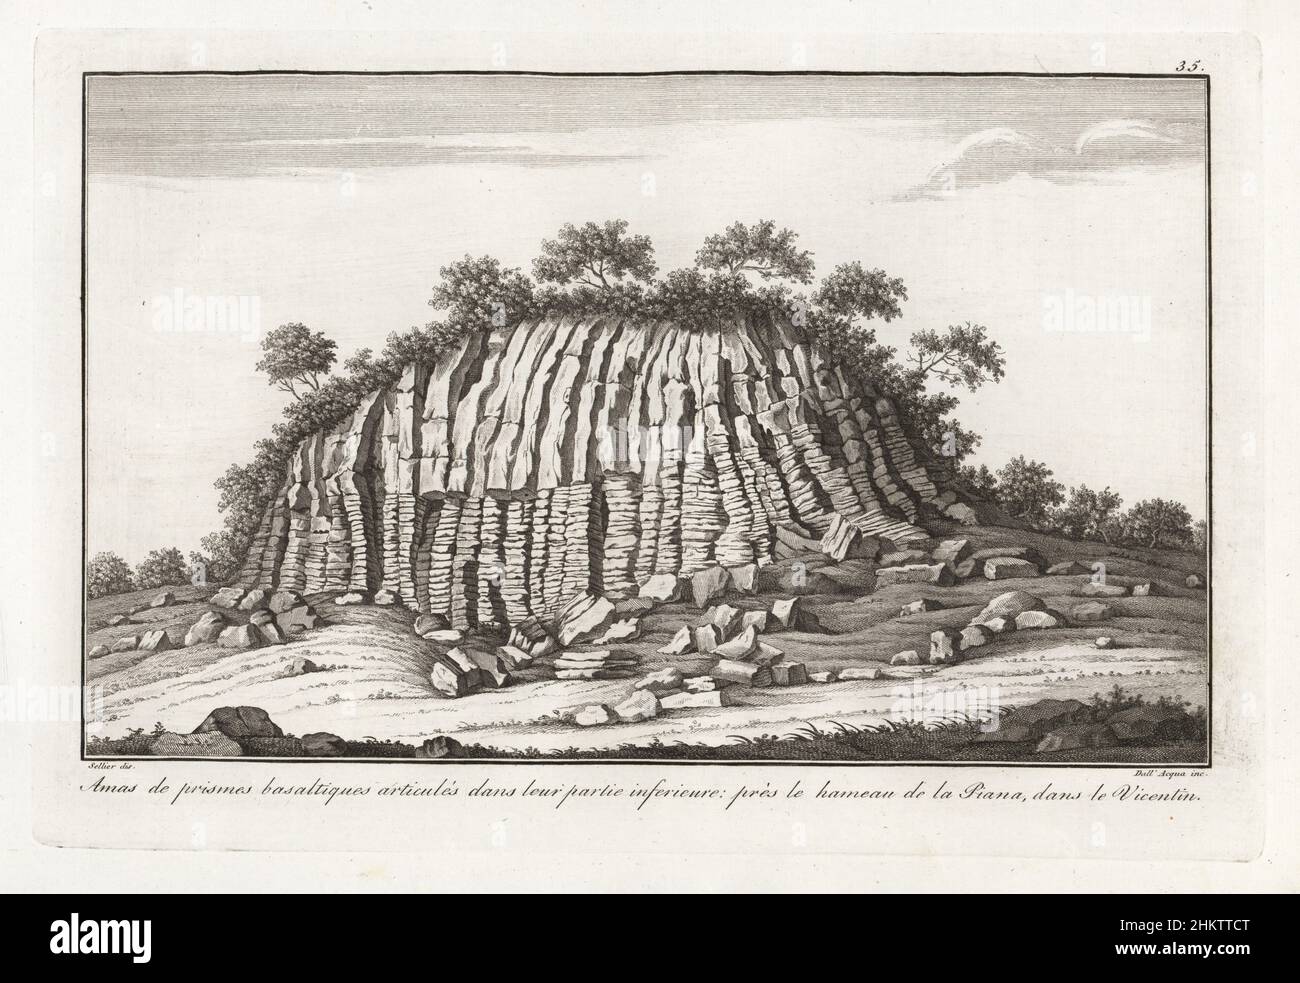 Mass of basalt prisms with articulated base near la Piana, Vicentin, northern Italy. Amas de prismes basaltiques articules dans leur partie inferieure pres le hameau de la Piana, dans le Vicentin. Copperplate engraving by Giuseppe Dall'Acqua after Sellier from Scipion Breislak’s Traite sur la Structure Exterieure du Globe, Treatise on the Exterior Structure of the Globe, Jean-Pierre Giegler, Milan, 1822. Stock Photo